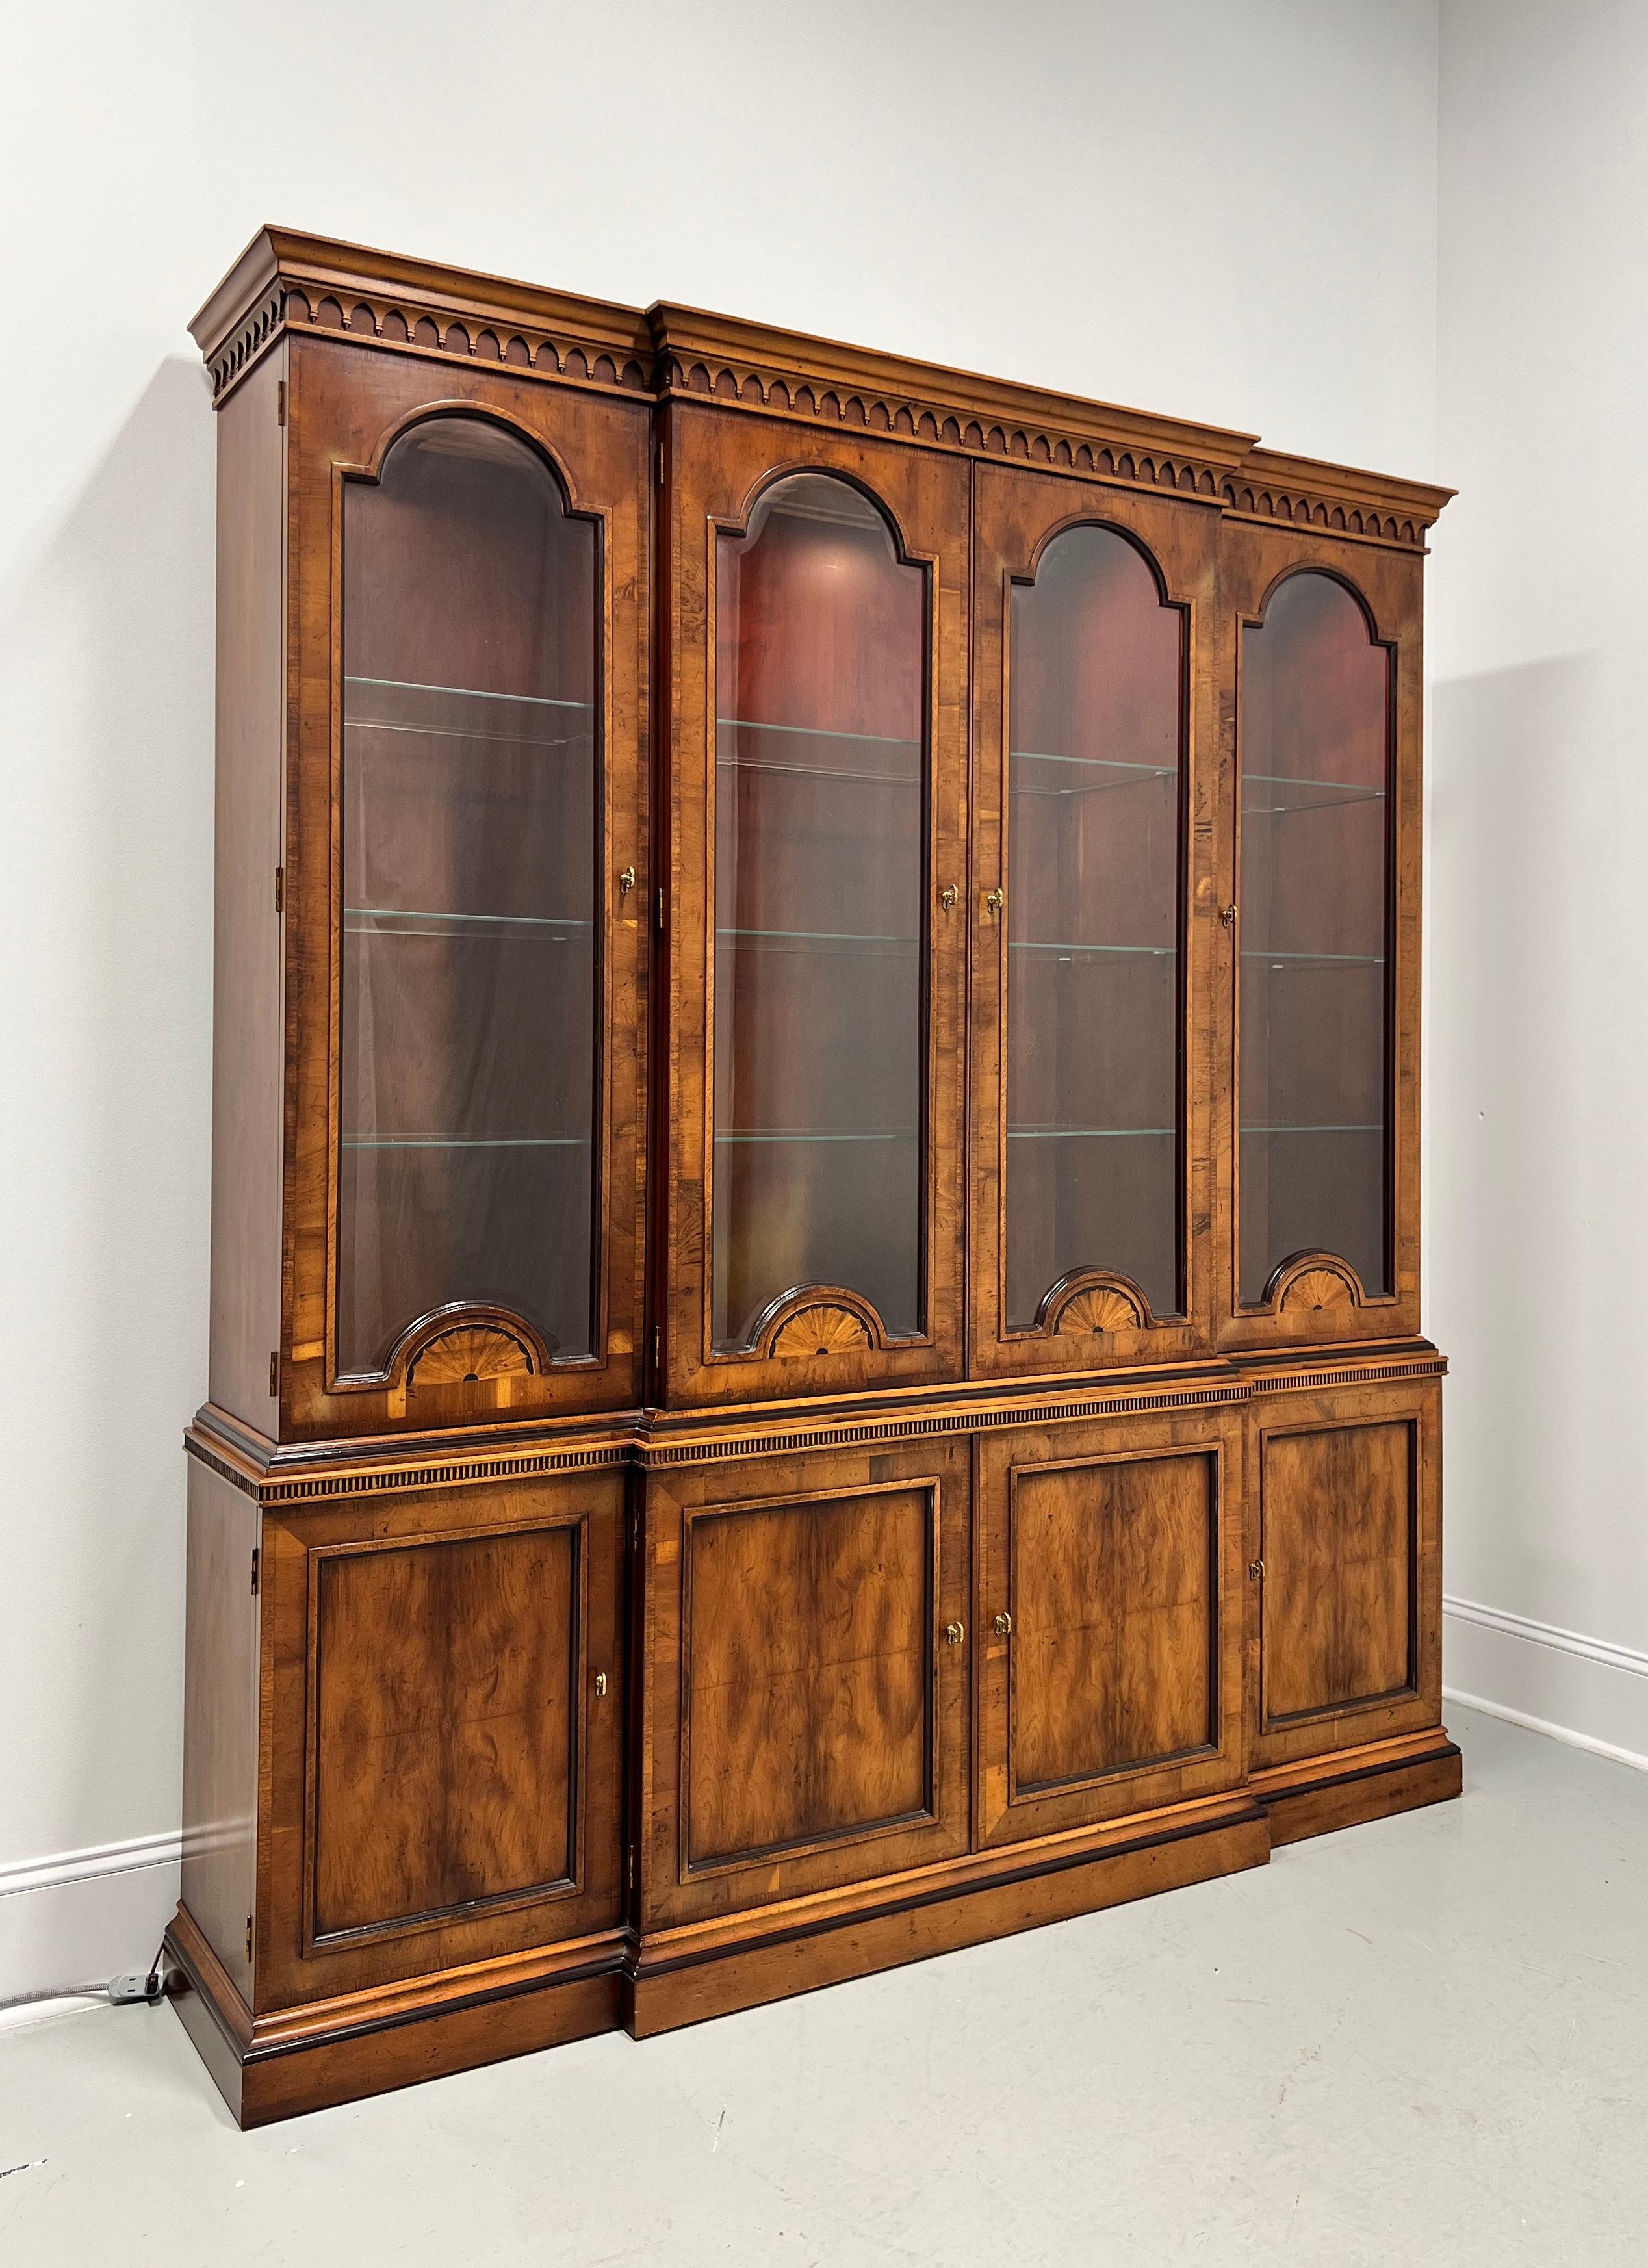 A Georgian style breakfront bookcase china cabinet by Henredon, from their 18th Century Portfolio. Yew wood with inlaid details, brass hardware, crown & stylized dentil moulding to top, arched solid glass doors with arched shell marquetry, ogee edge